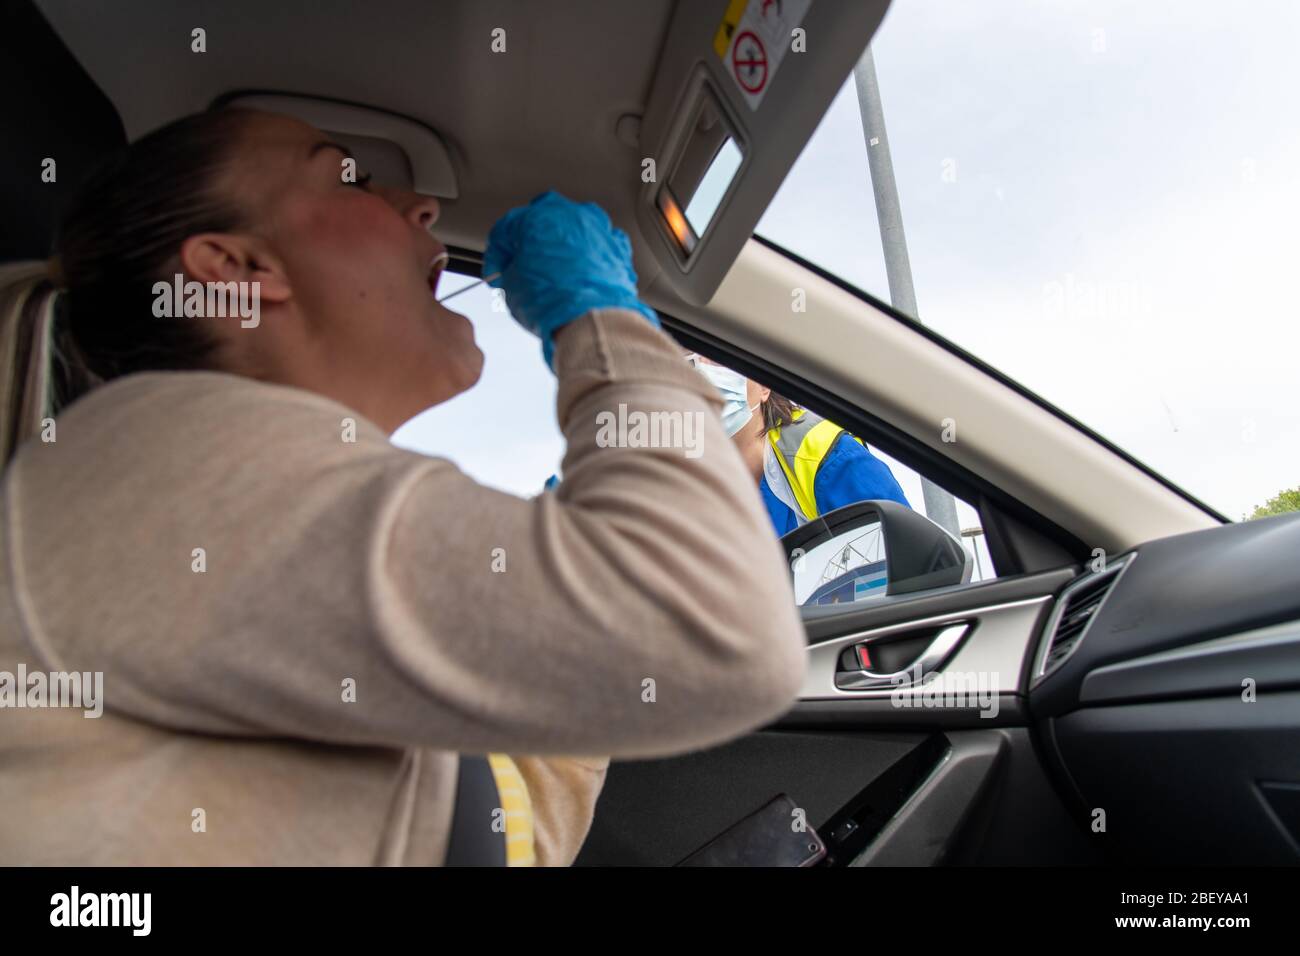 A woman being tested for coronavirus Covid-19 at the testing drive through centre at Cardiff City Stadium, Wales Stock Photo